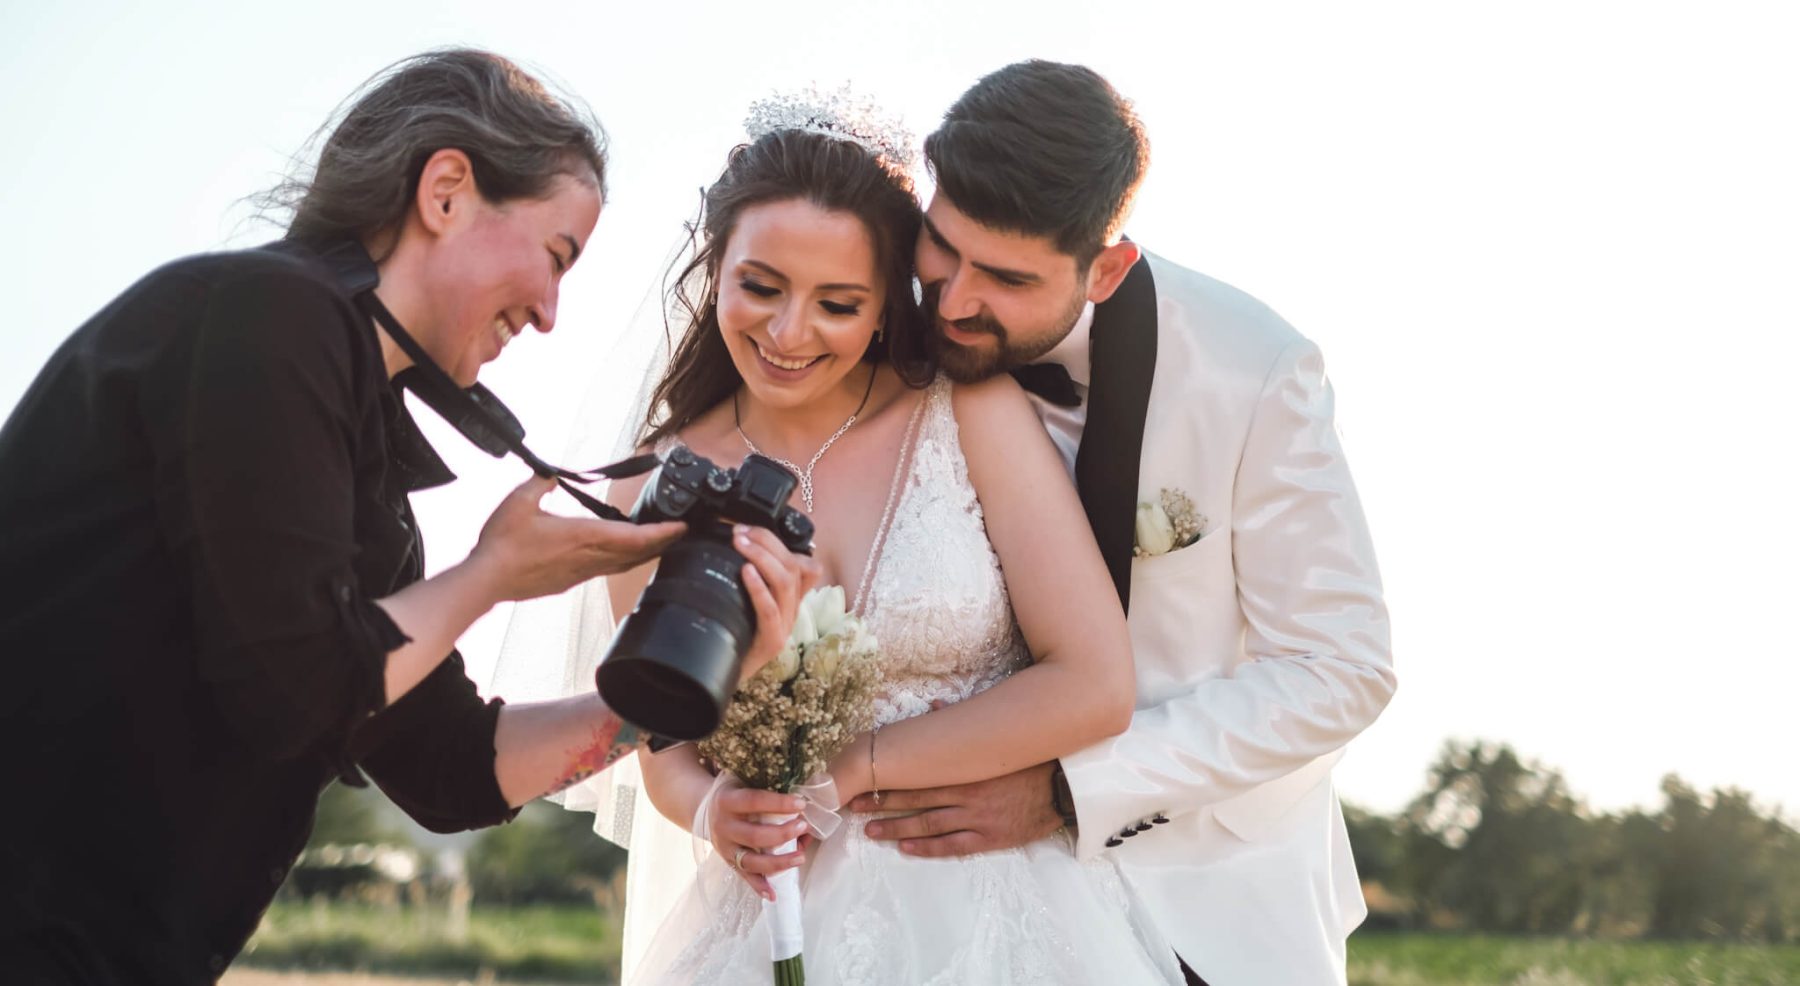 Photographer showing her camera to bride and groom